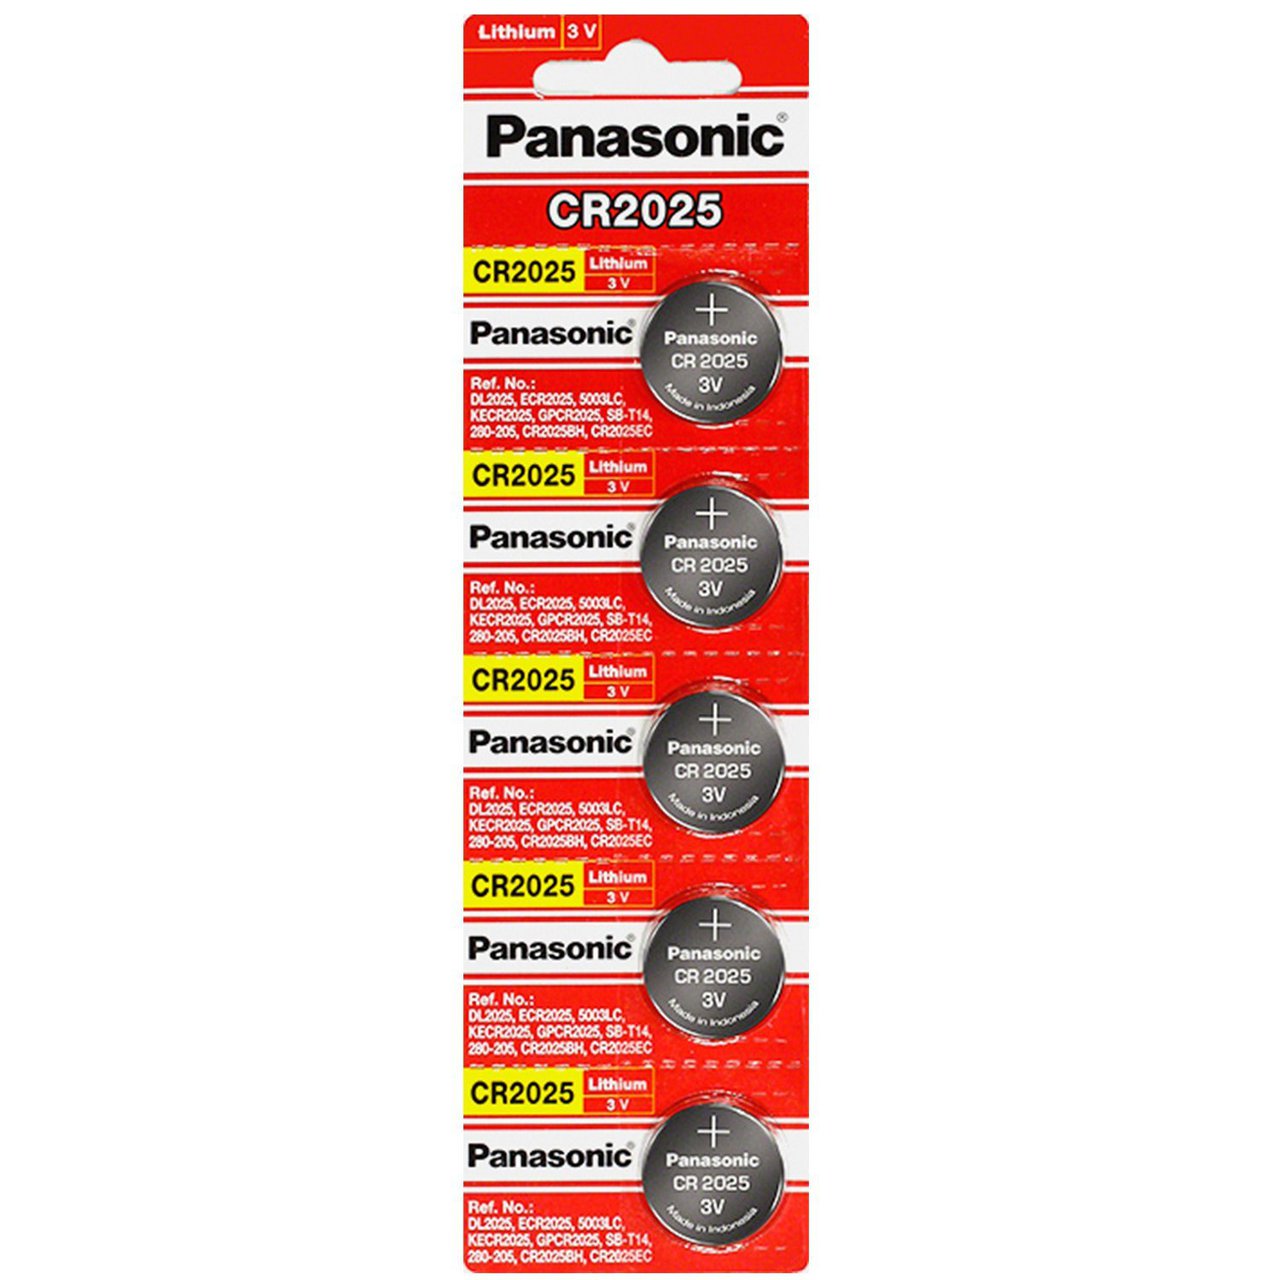 Panasonic CR2025 3V Lithium Coin Battery - 5 Pack + FREE SHIPPING!